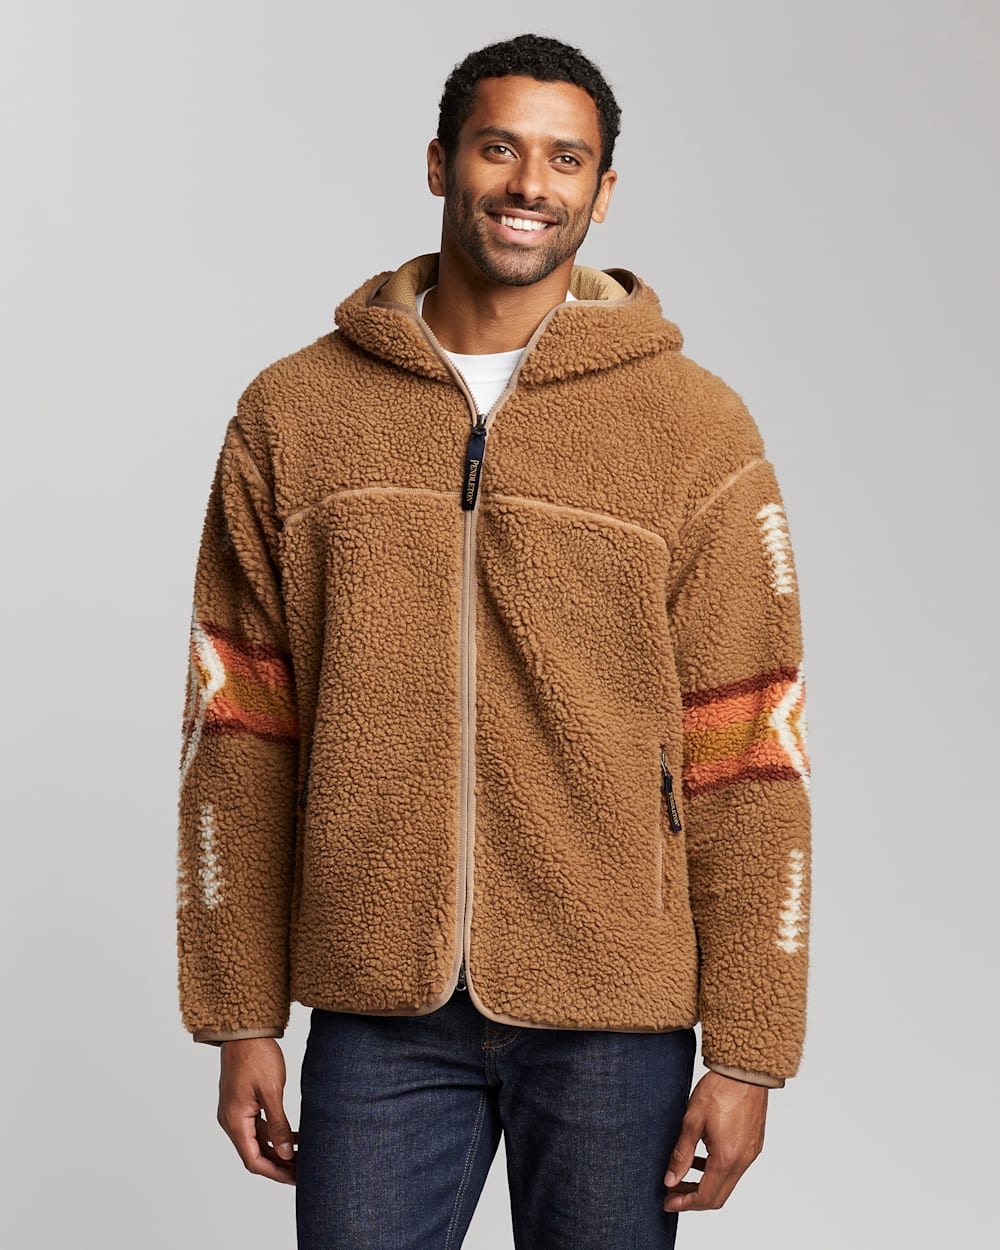 ALTERNATE VIEW OF LIMITED EDITION BOA FLEECE HOODIE IN CAMEL HARDING image number 5